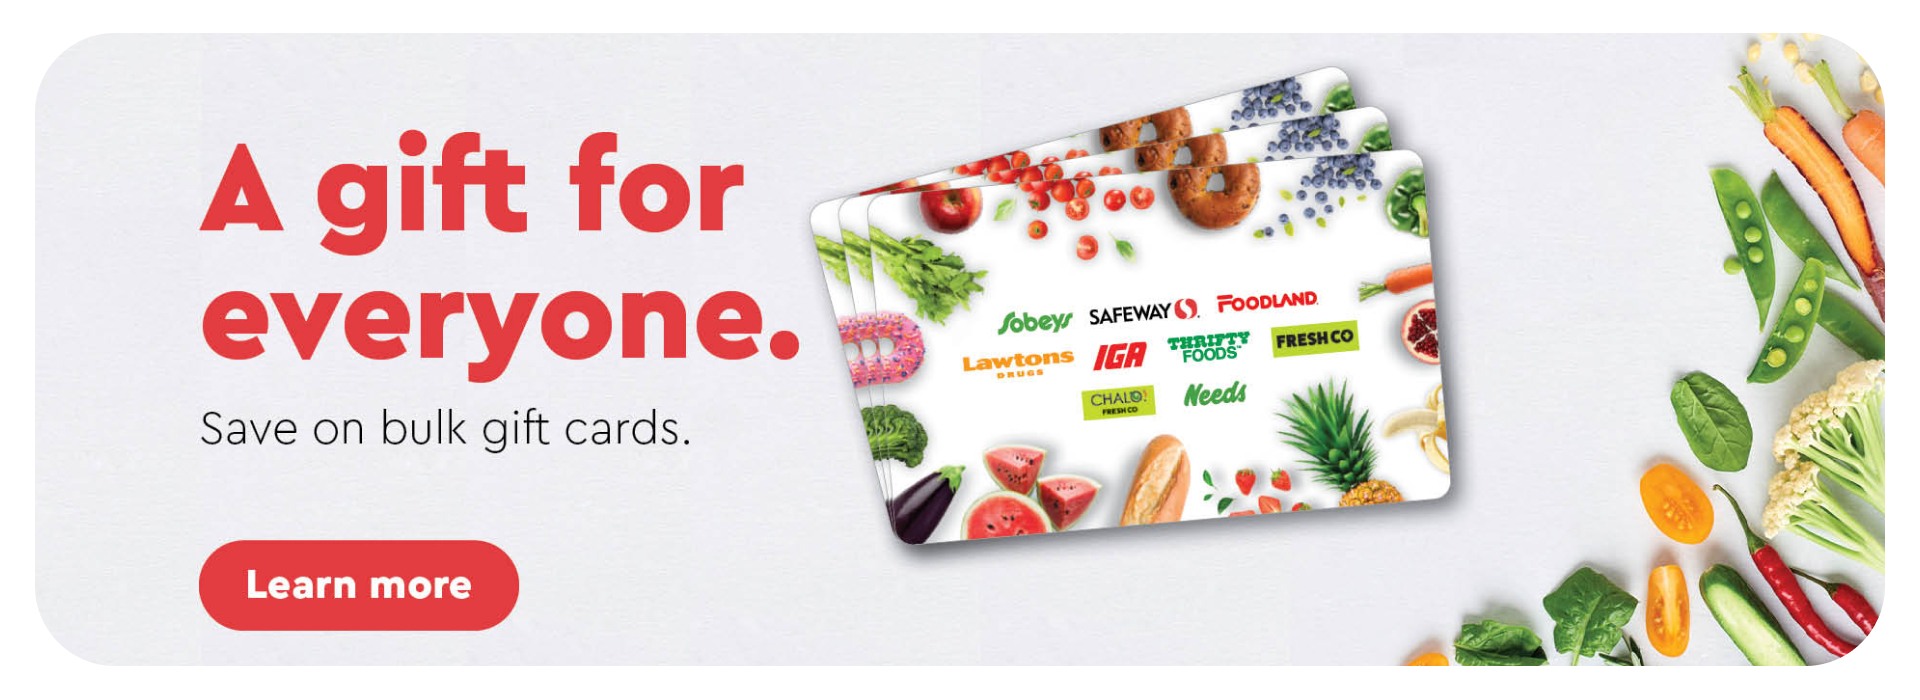 A gift for everyone. Save on bulk gift cards.